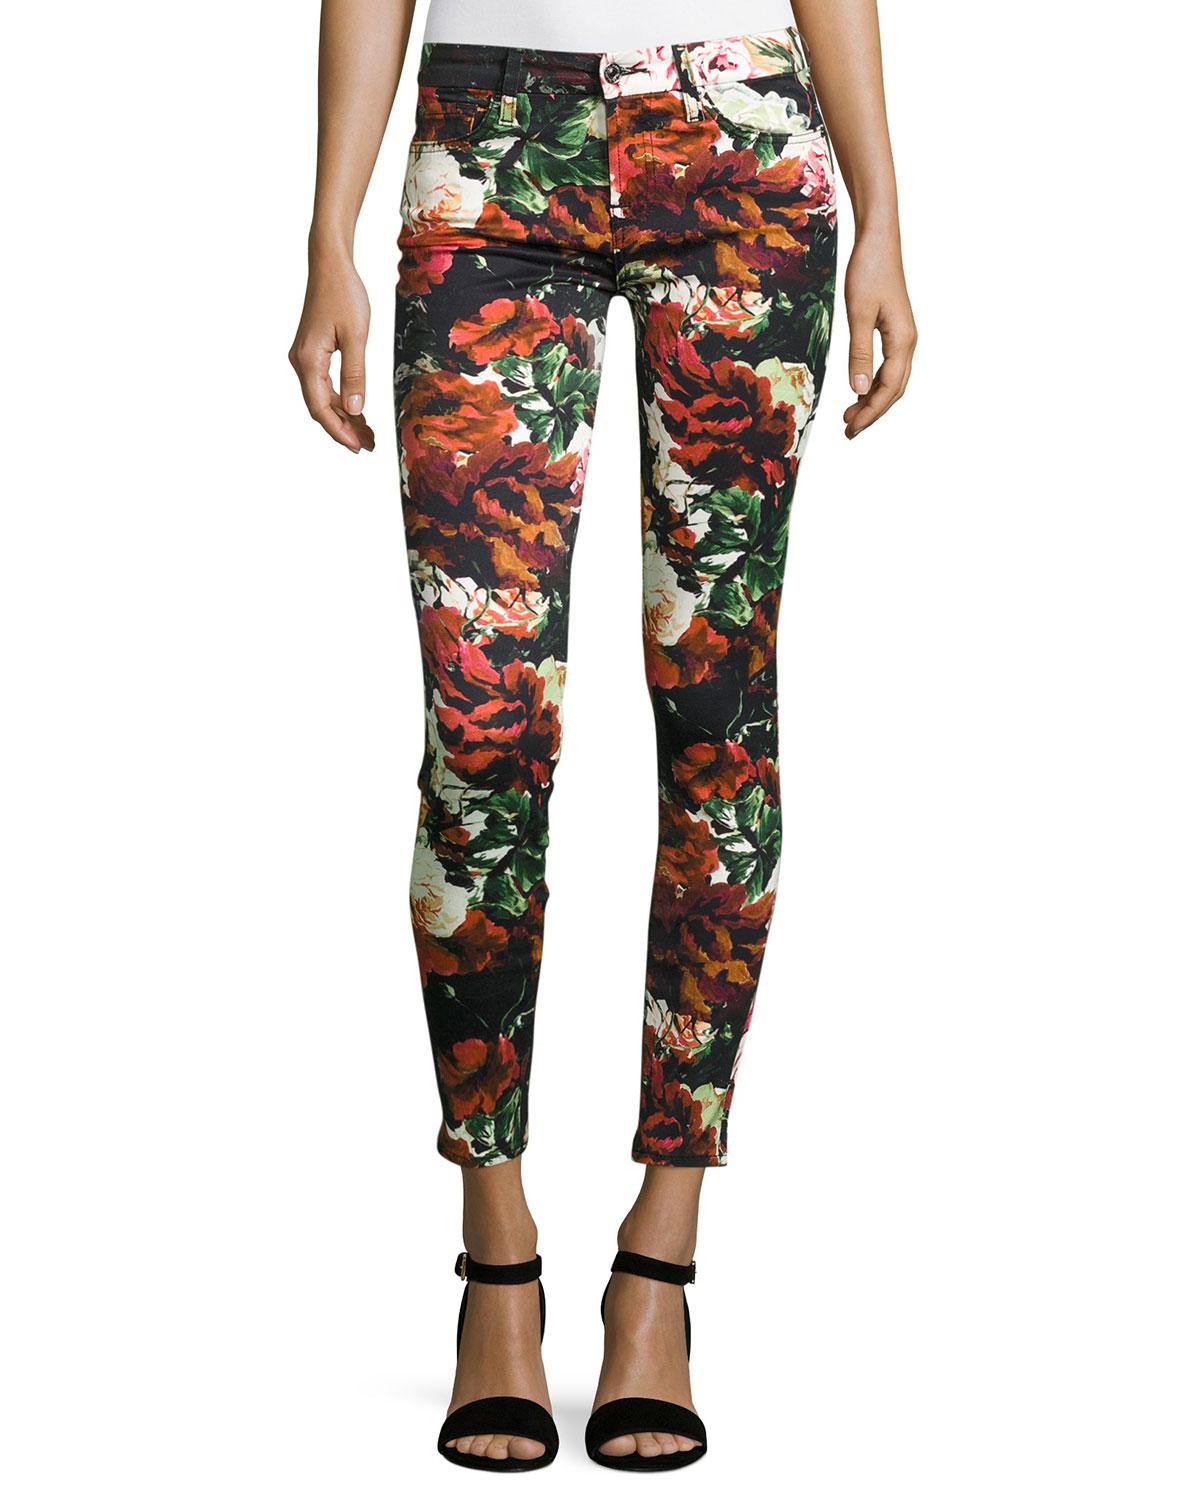 Lyst - 7 For All Mankind Floral-print Ankle Skinny Jeans in Black